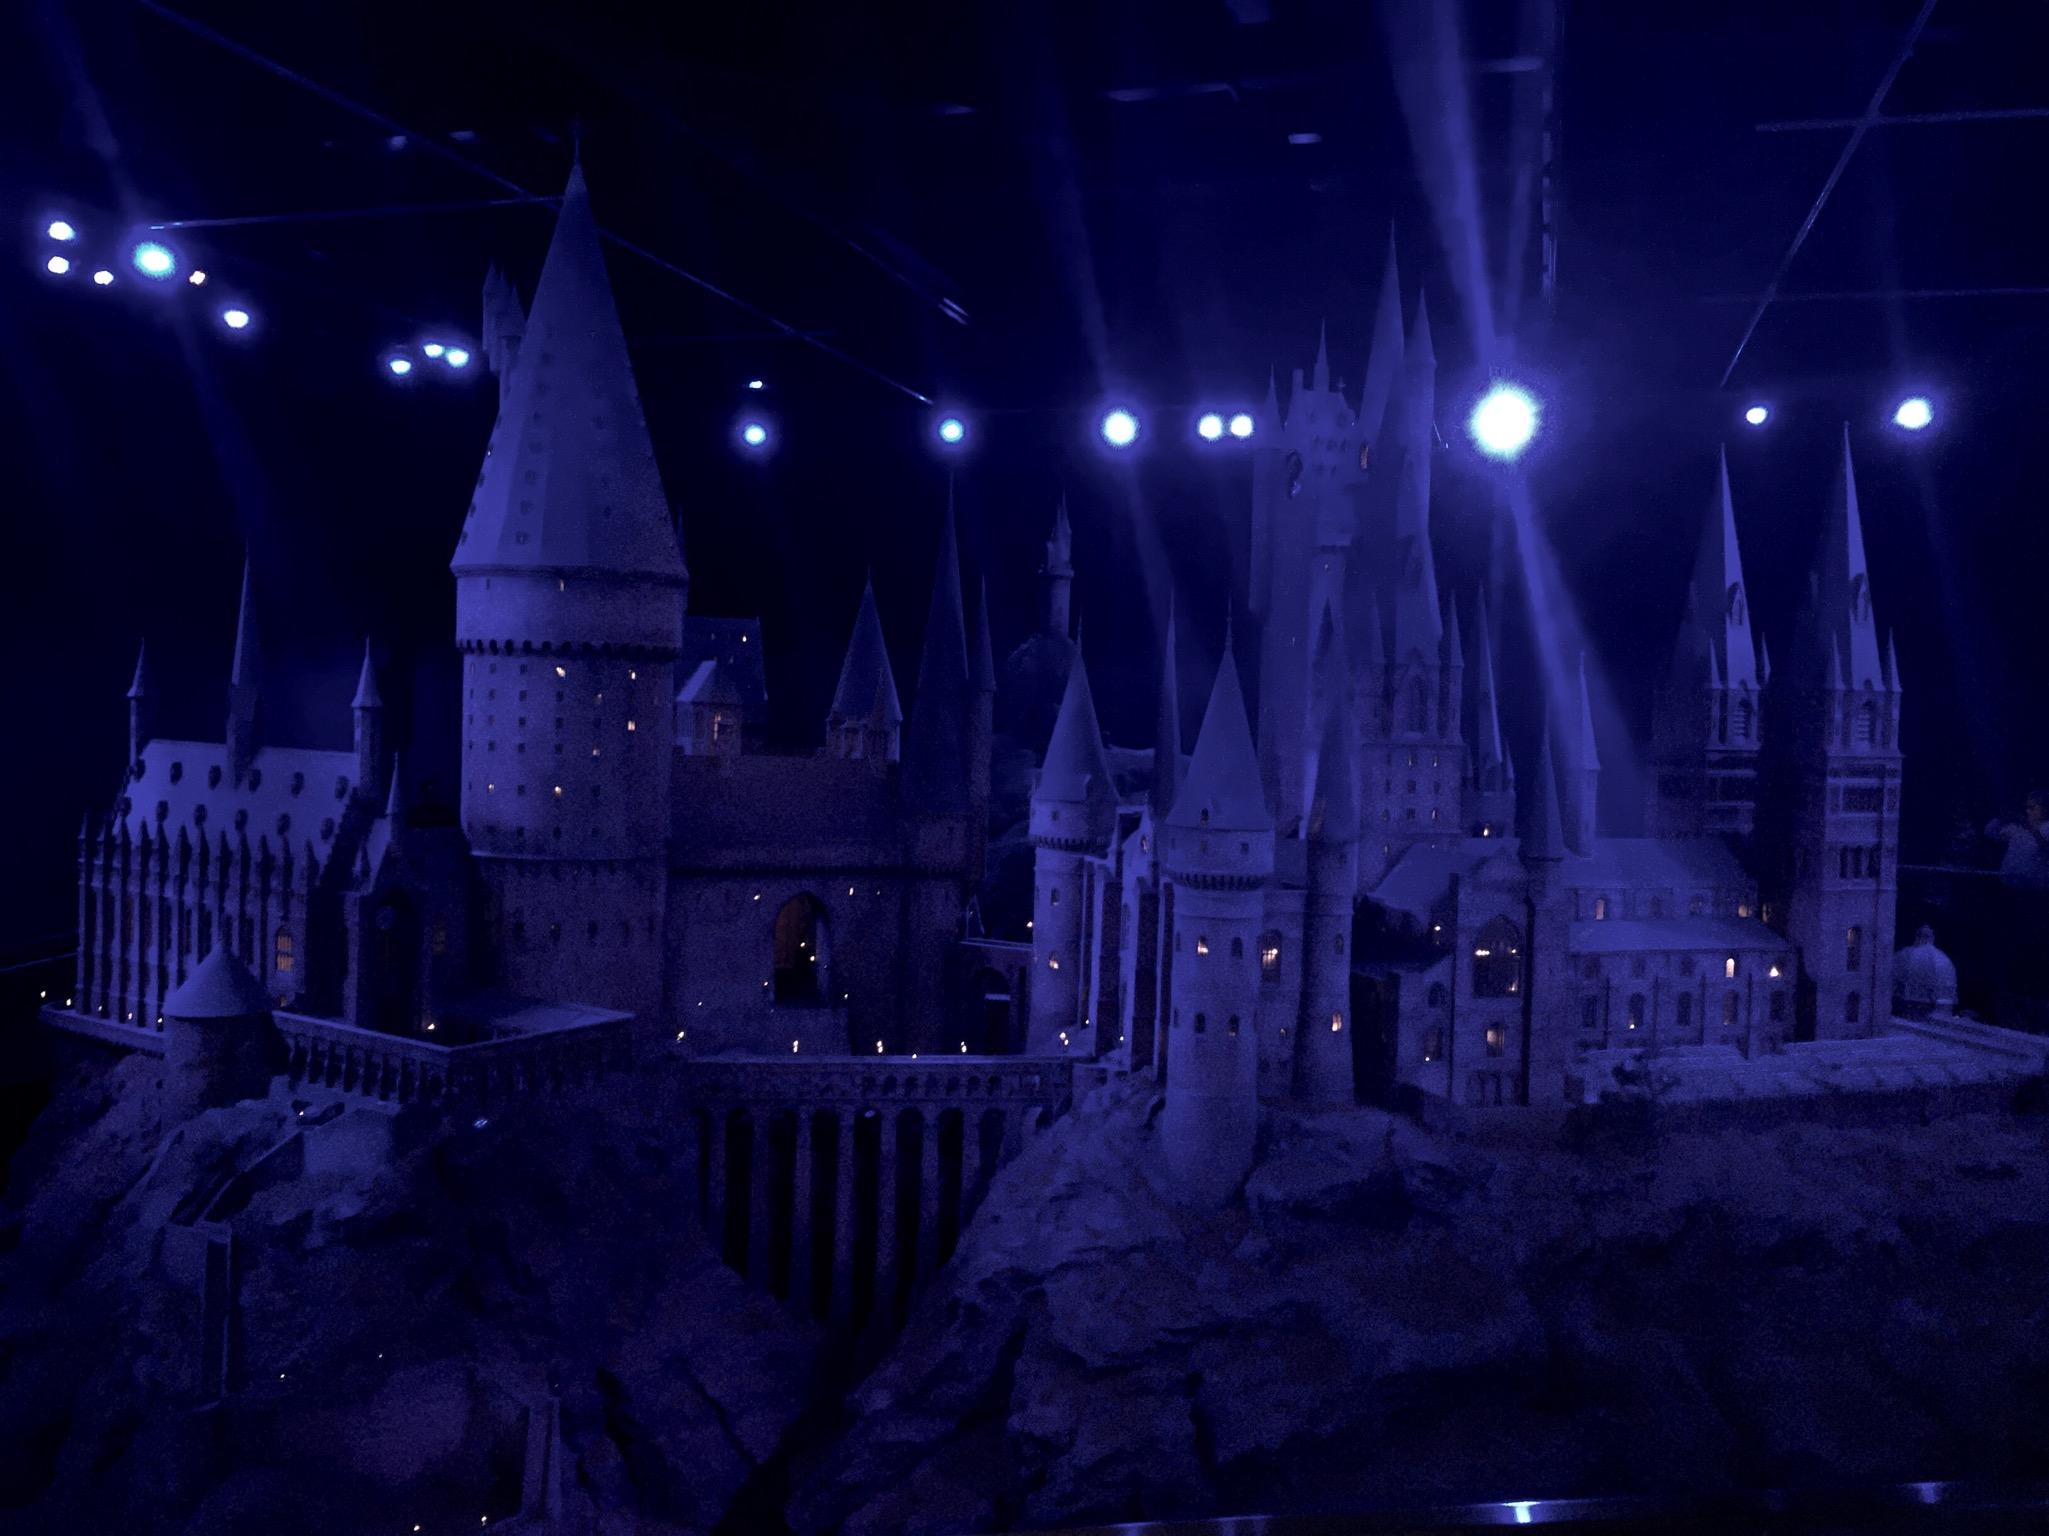 NIGHTTIME IN ENGLAND: At night, Hogwarts looks blue in the moonlight. It's not that scary, unless you want to go into the Forbidden Forest. Most students just stick to the Restricted Section of the library.